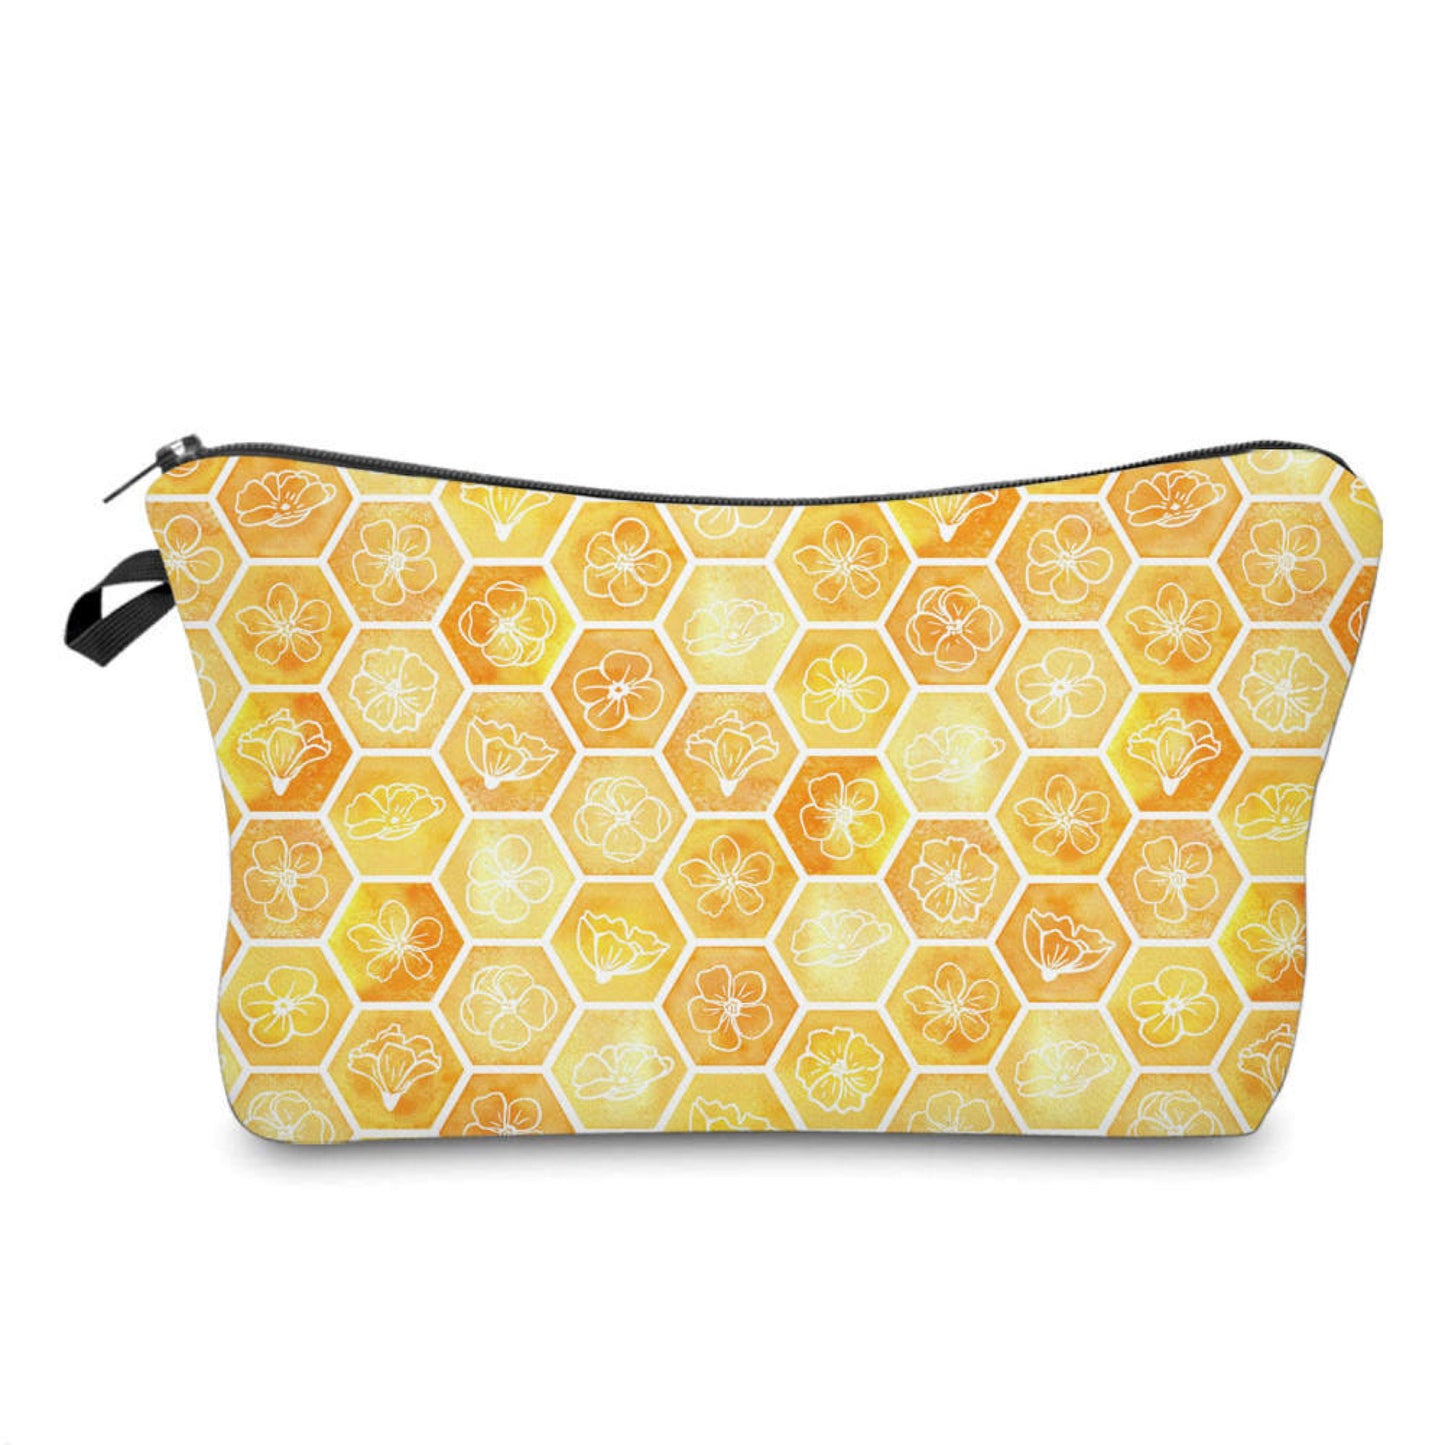 Pouch - Bee, Honeycomb Designs